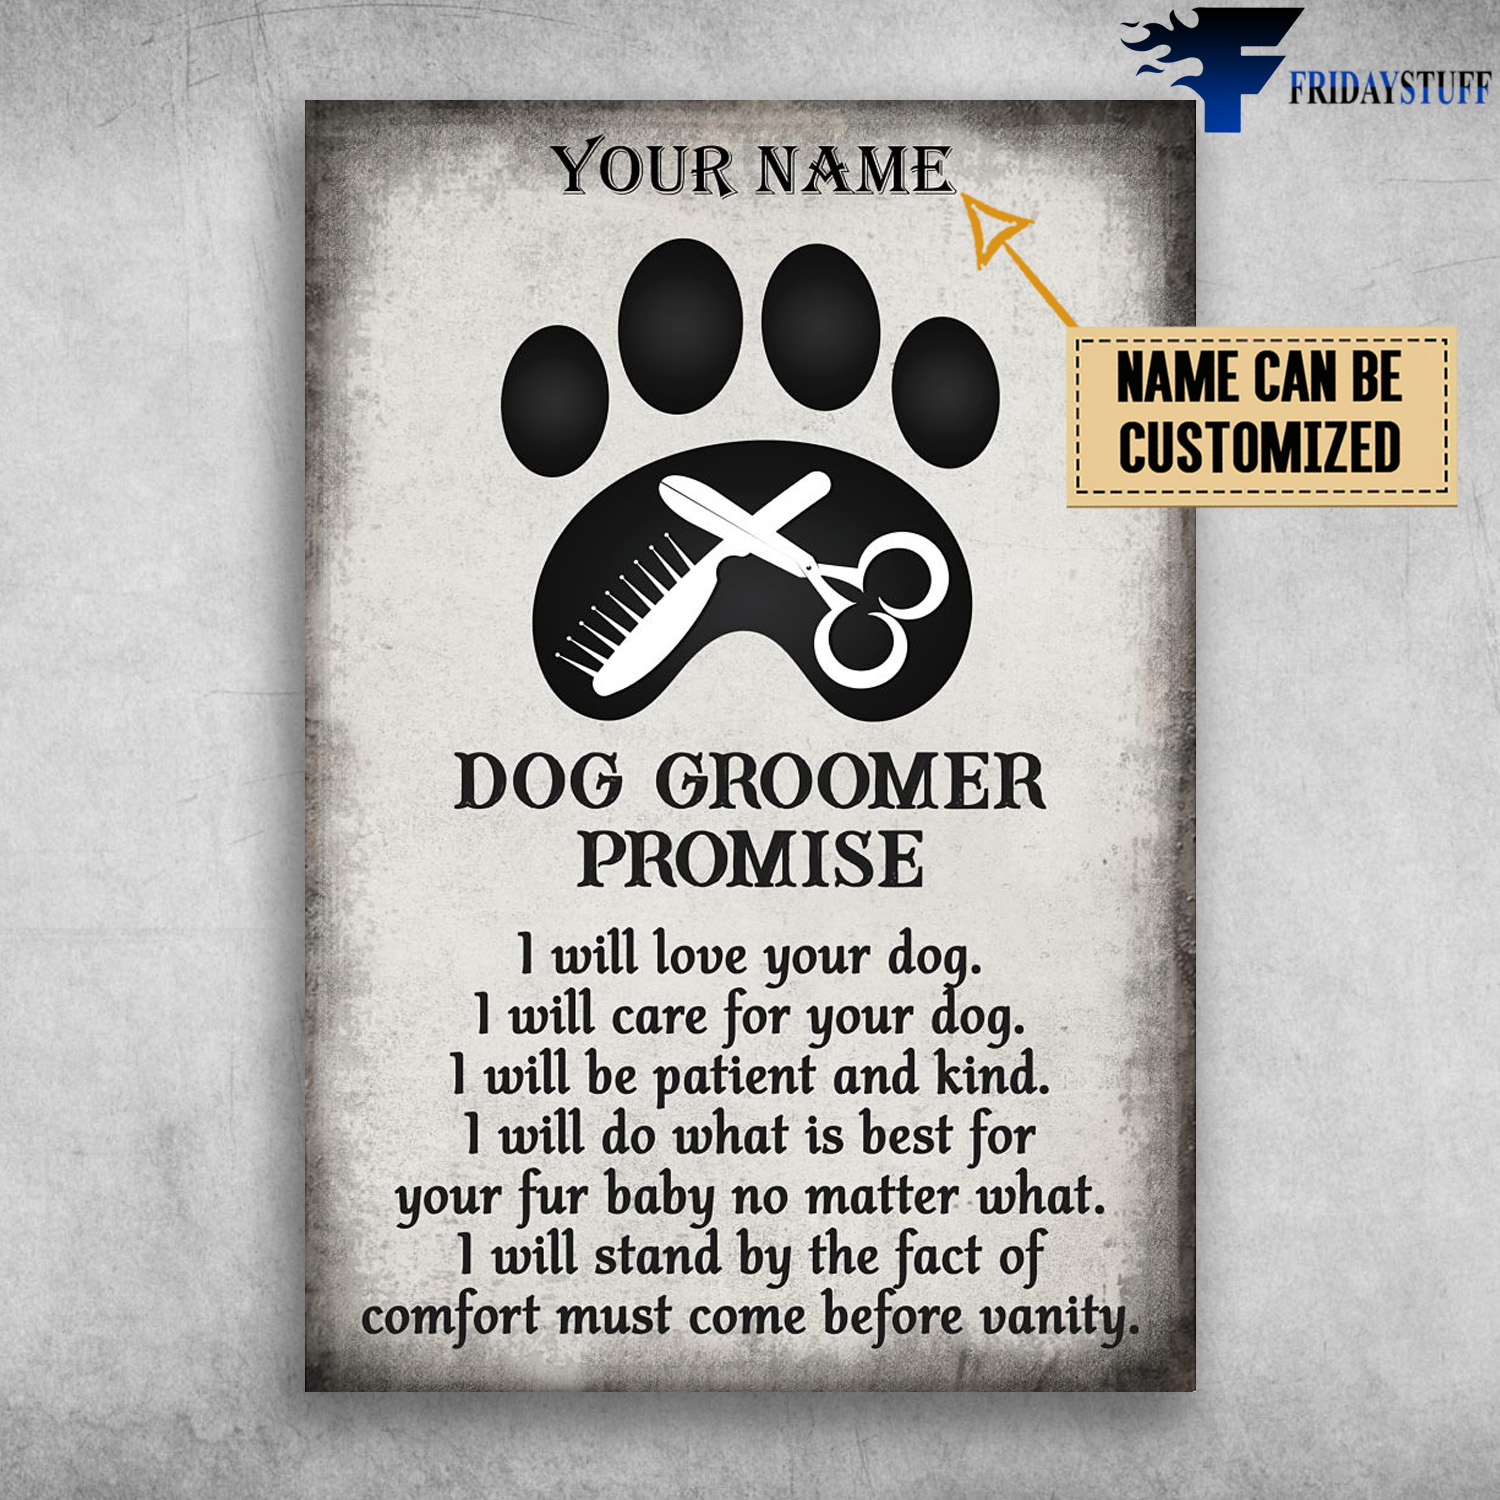 Dog Groomer Promise, I Will Love Your Dog, I Will Care For Your Dog, I Will Be Patient And Kind, I Will Do What I Best For Your Fur Baby No Matter What, I Will Stand By The Fact Of Comfort Must Come Before Vanity